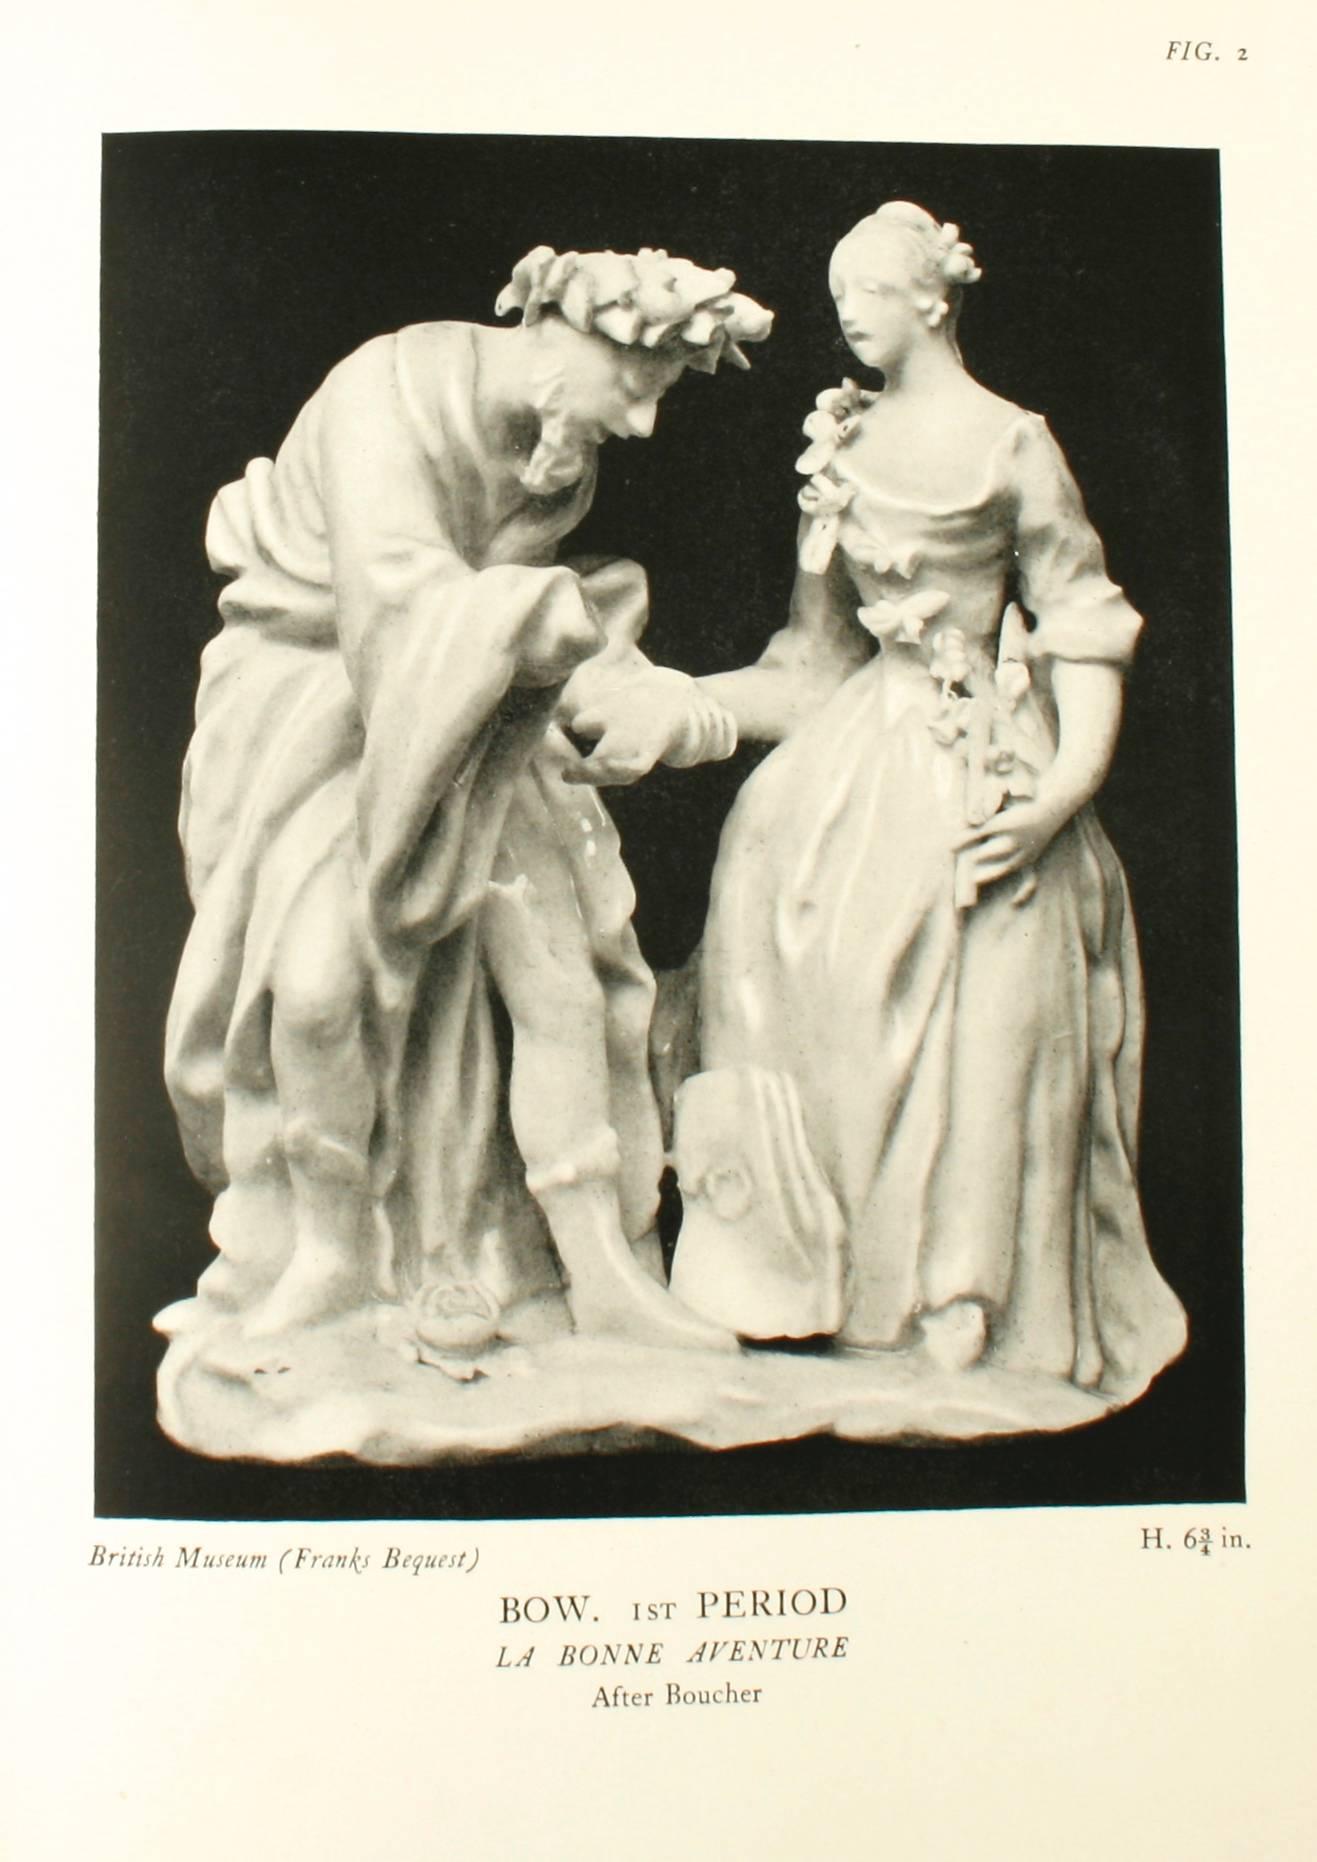 English porcelain figures of the 18th century by William King. London: Medici society, 1925. First edition hardcover, no dust jacket. The pieces were selected and described and with an introduction by William King, of the Victoria and Albert Museum.